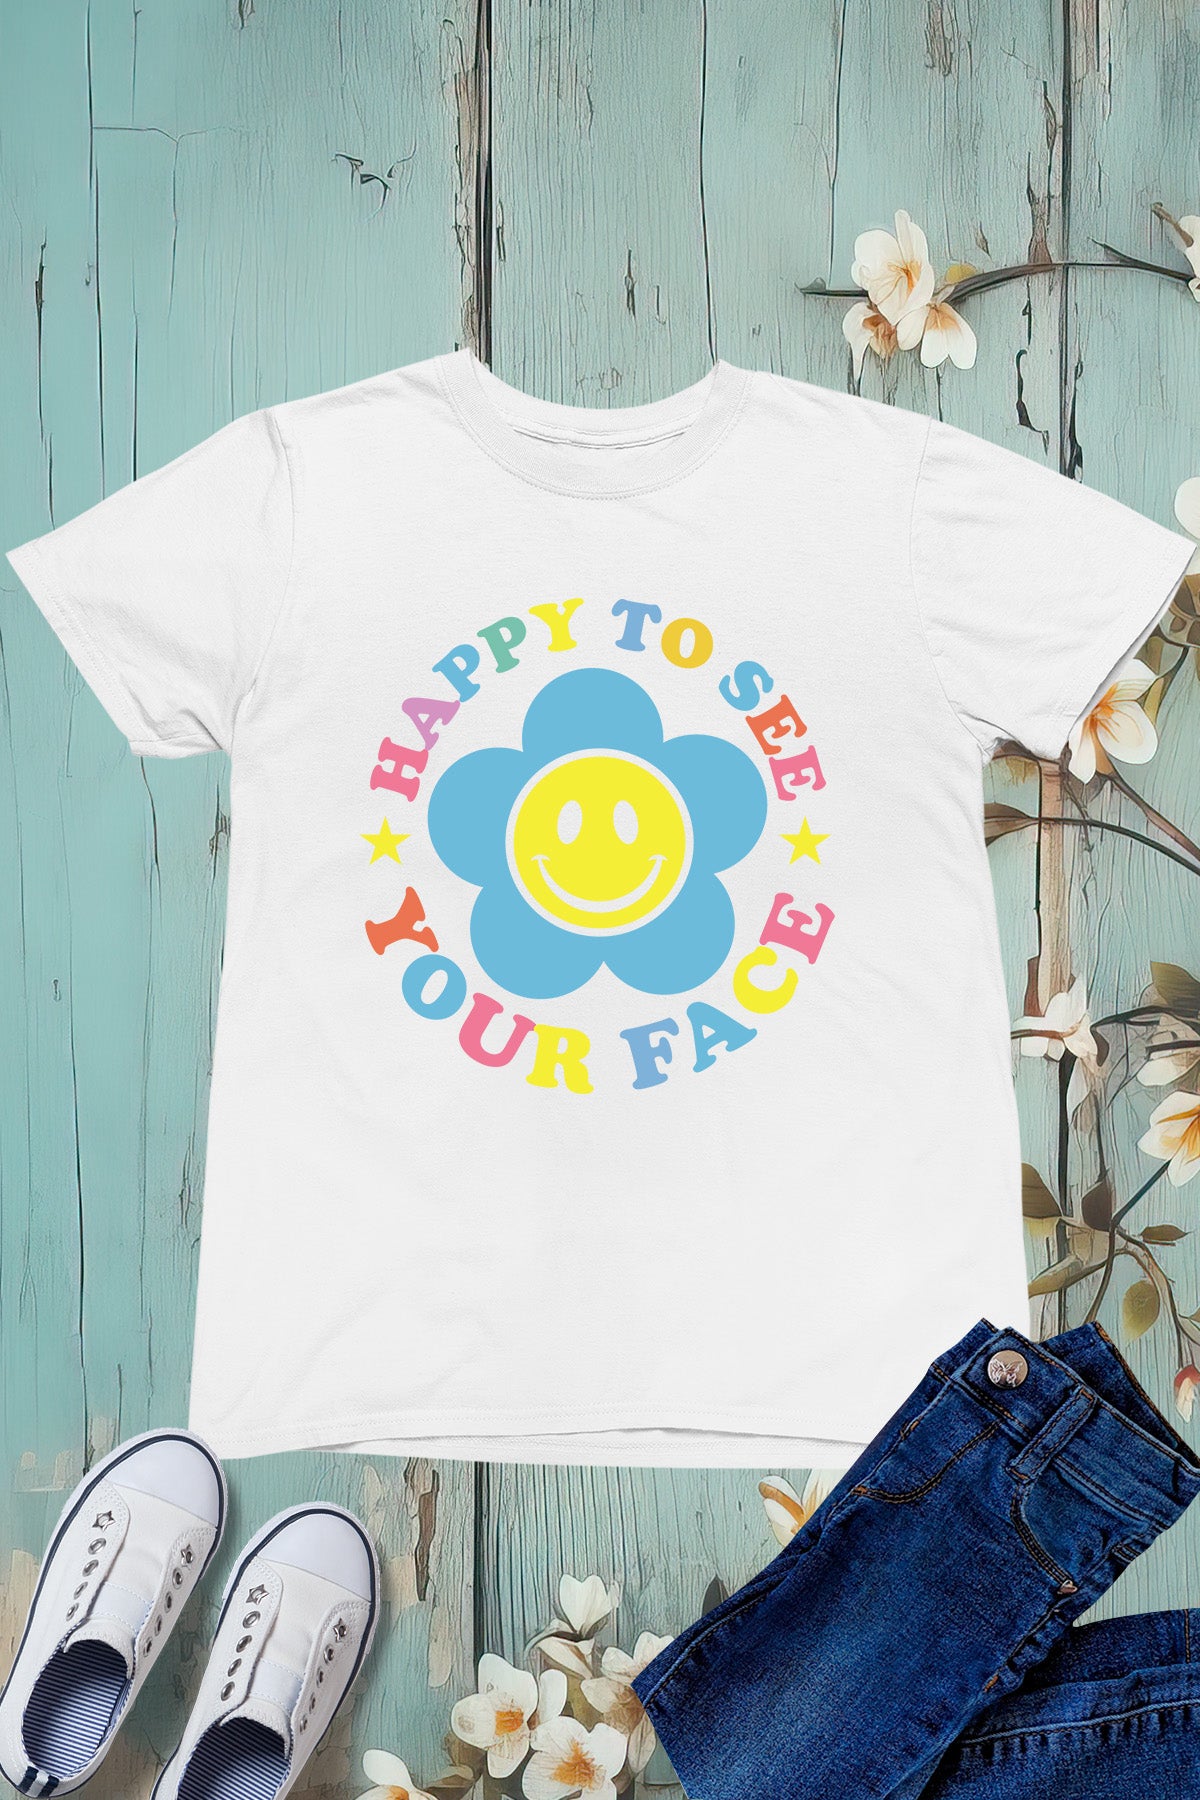 Happy to See Your face back To School T Shirt